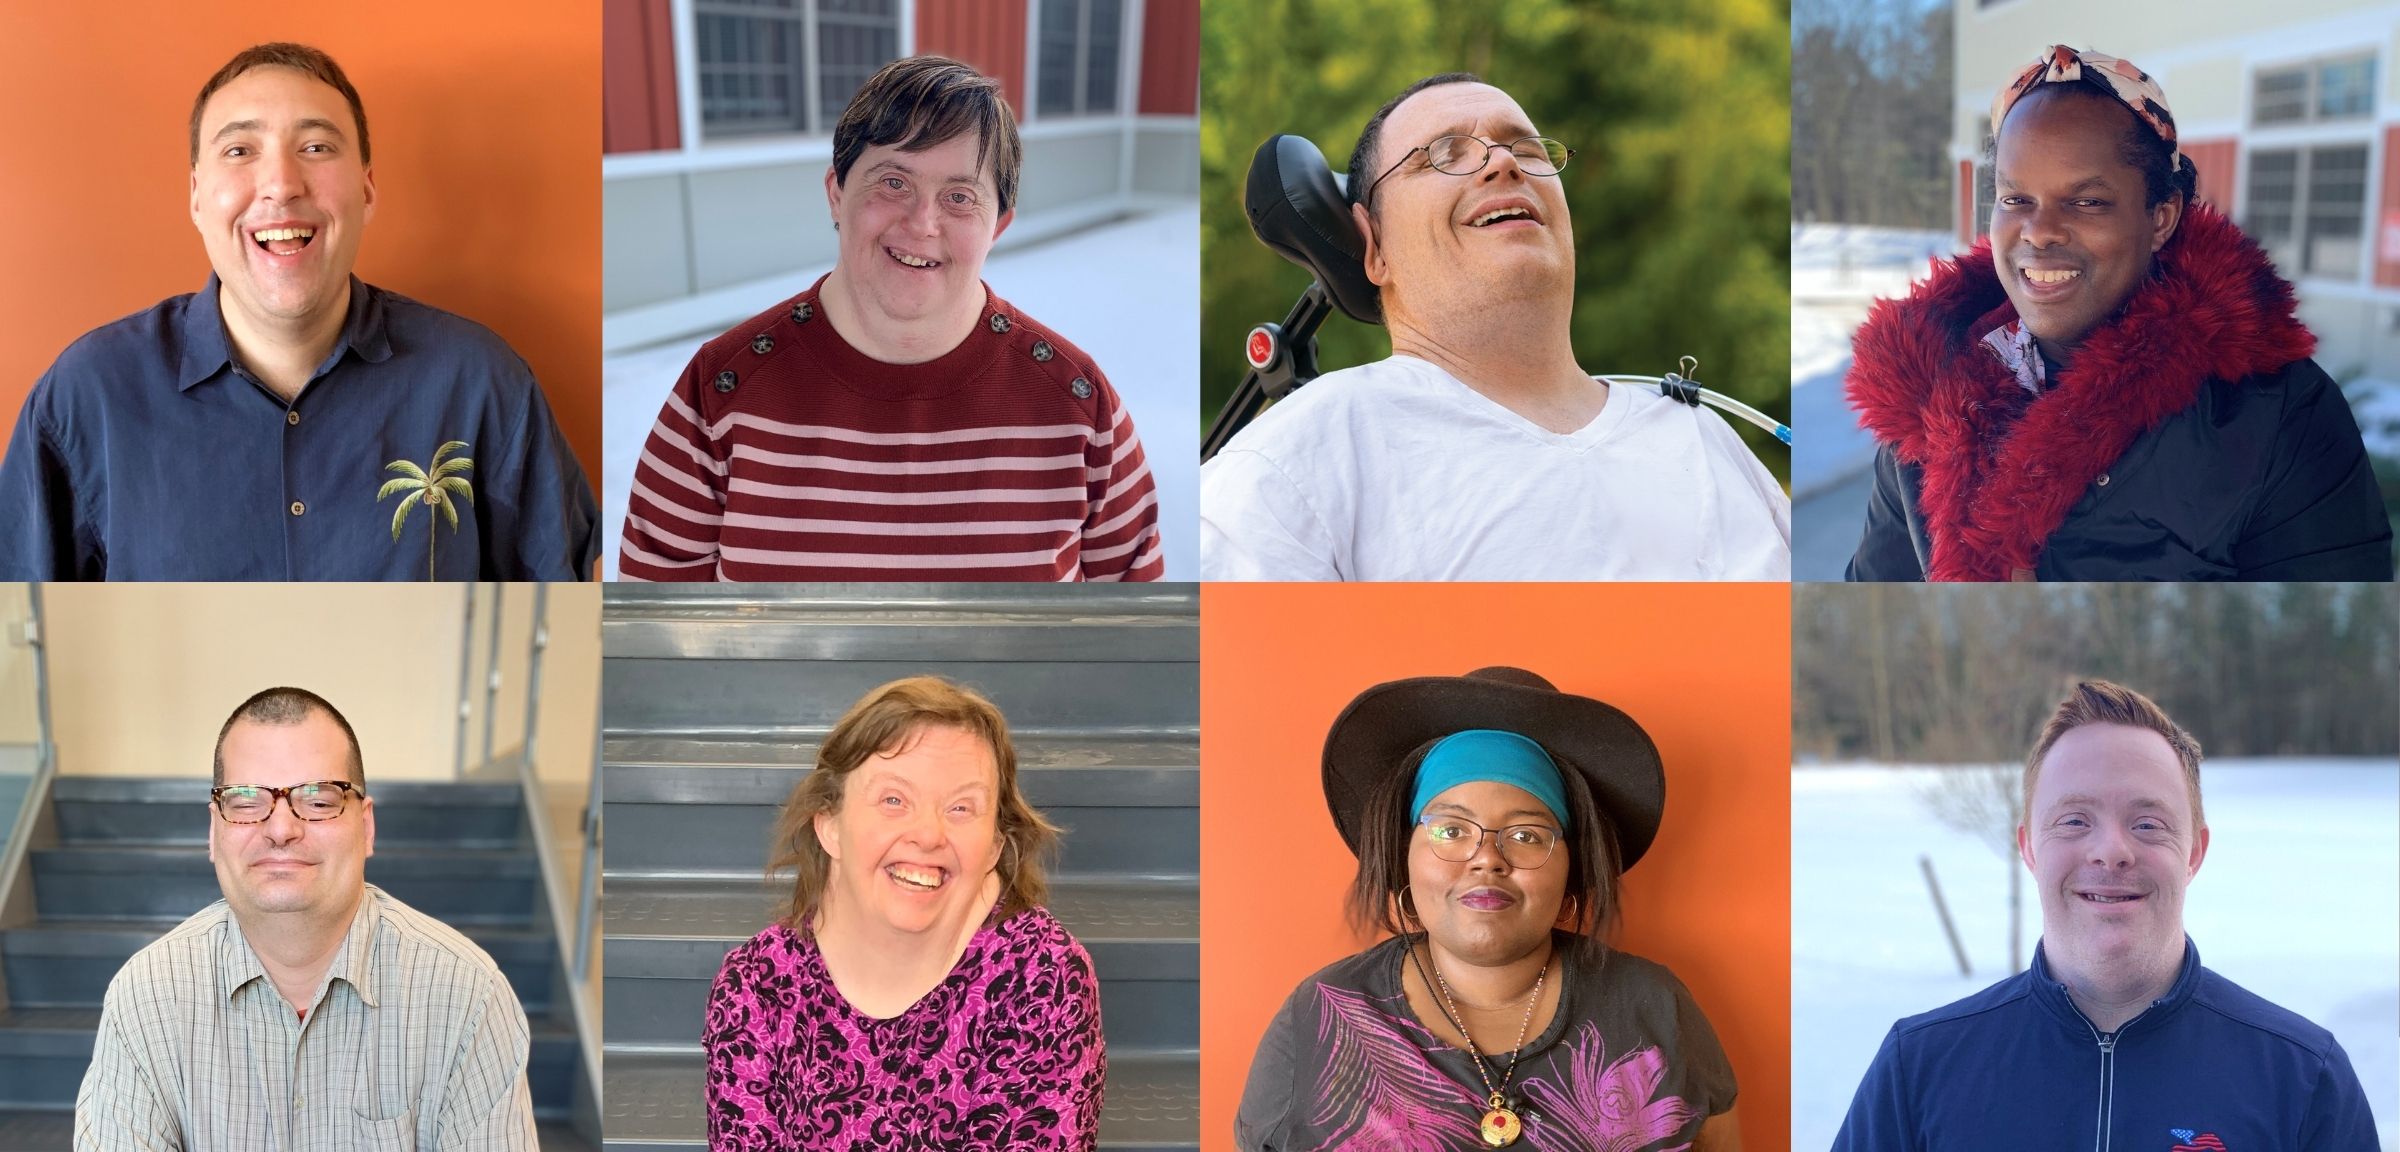 portraits of various people with developmental disabilities